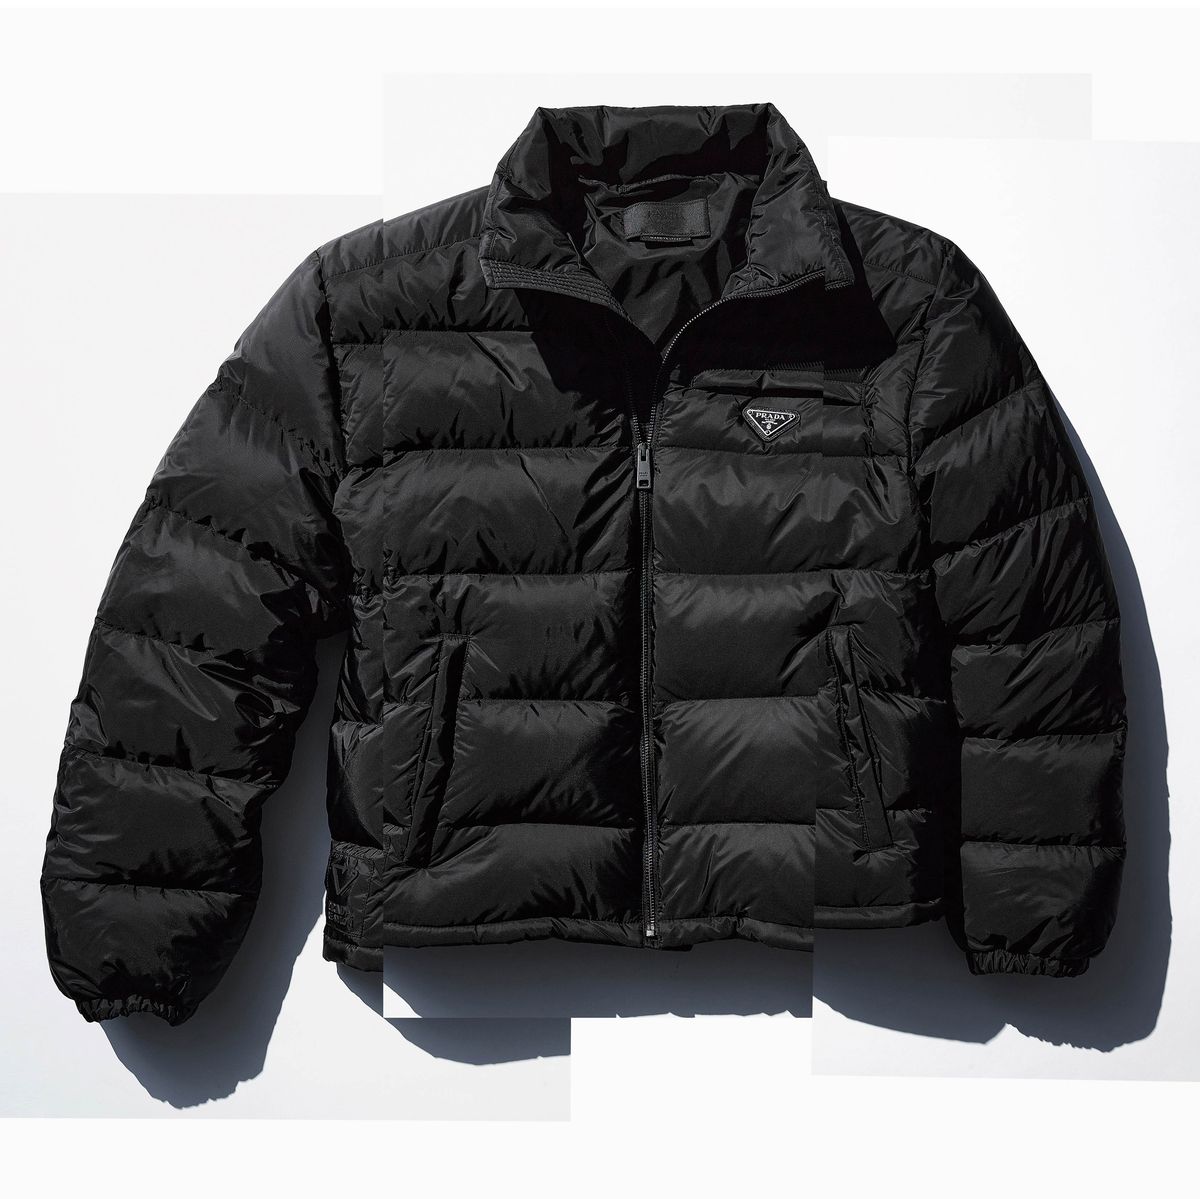 vis onderpand module Prada ReNylon Puffer Jacket Review - The Esquire Investment